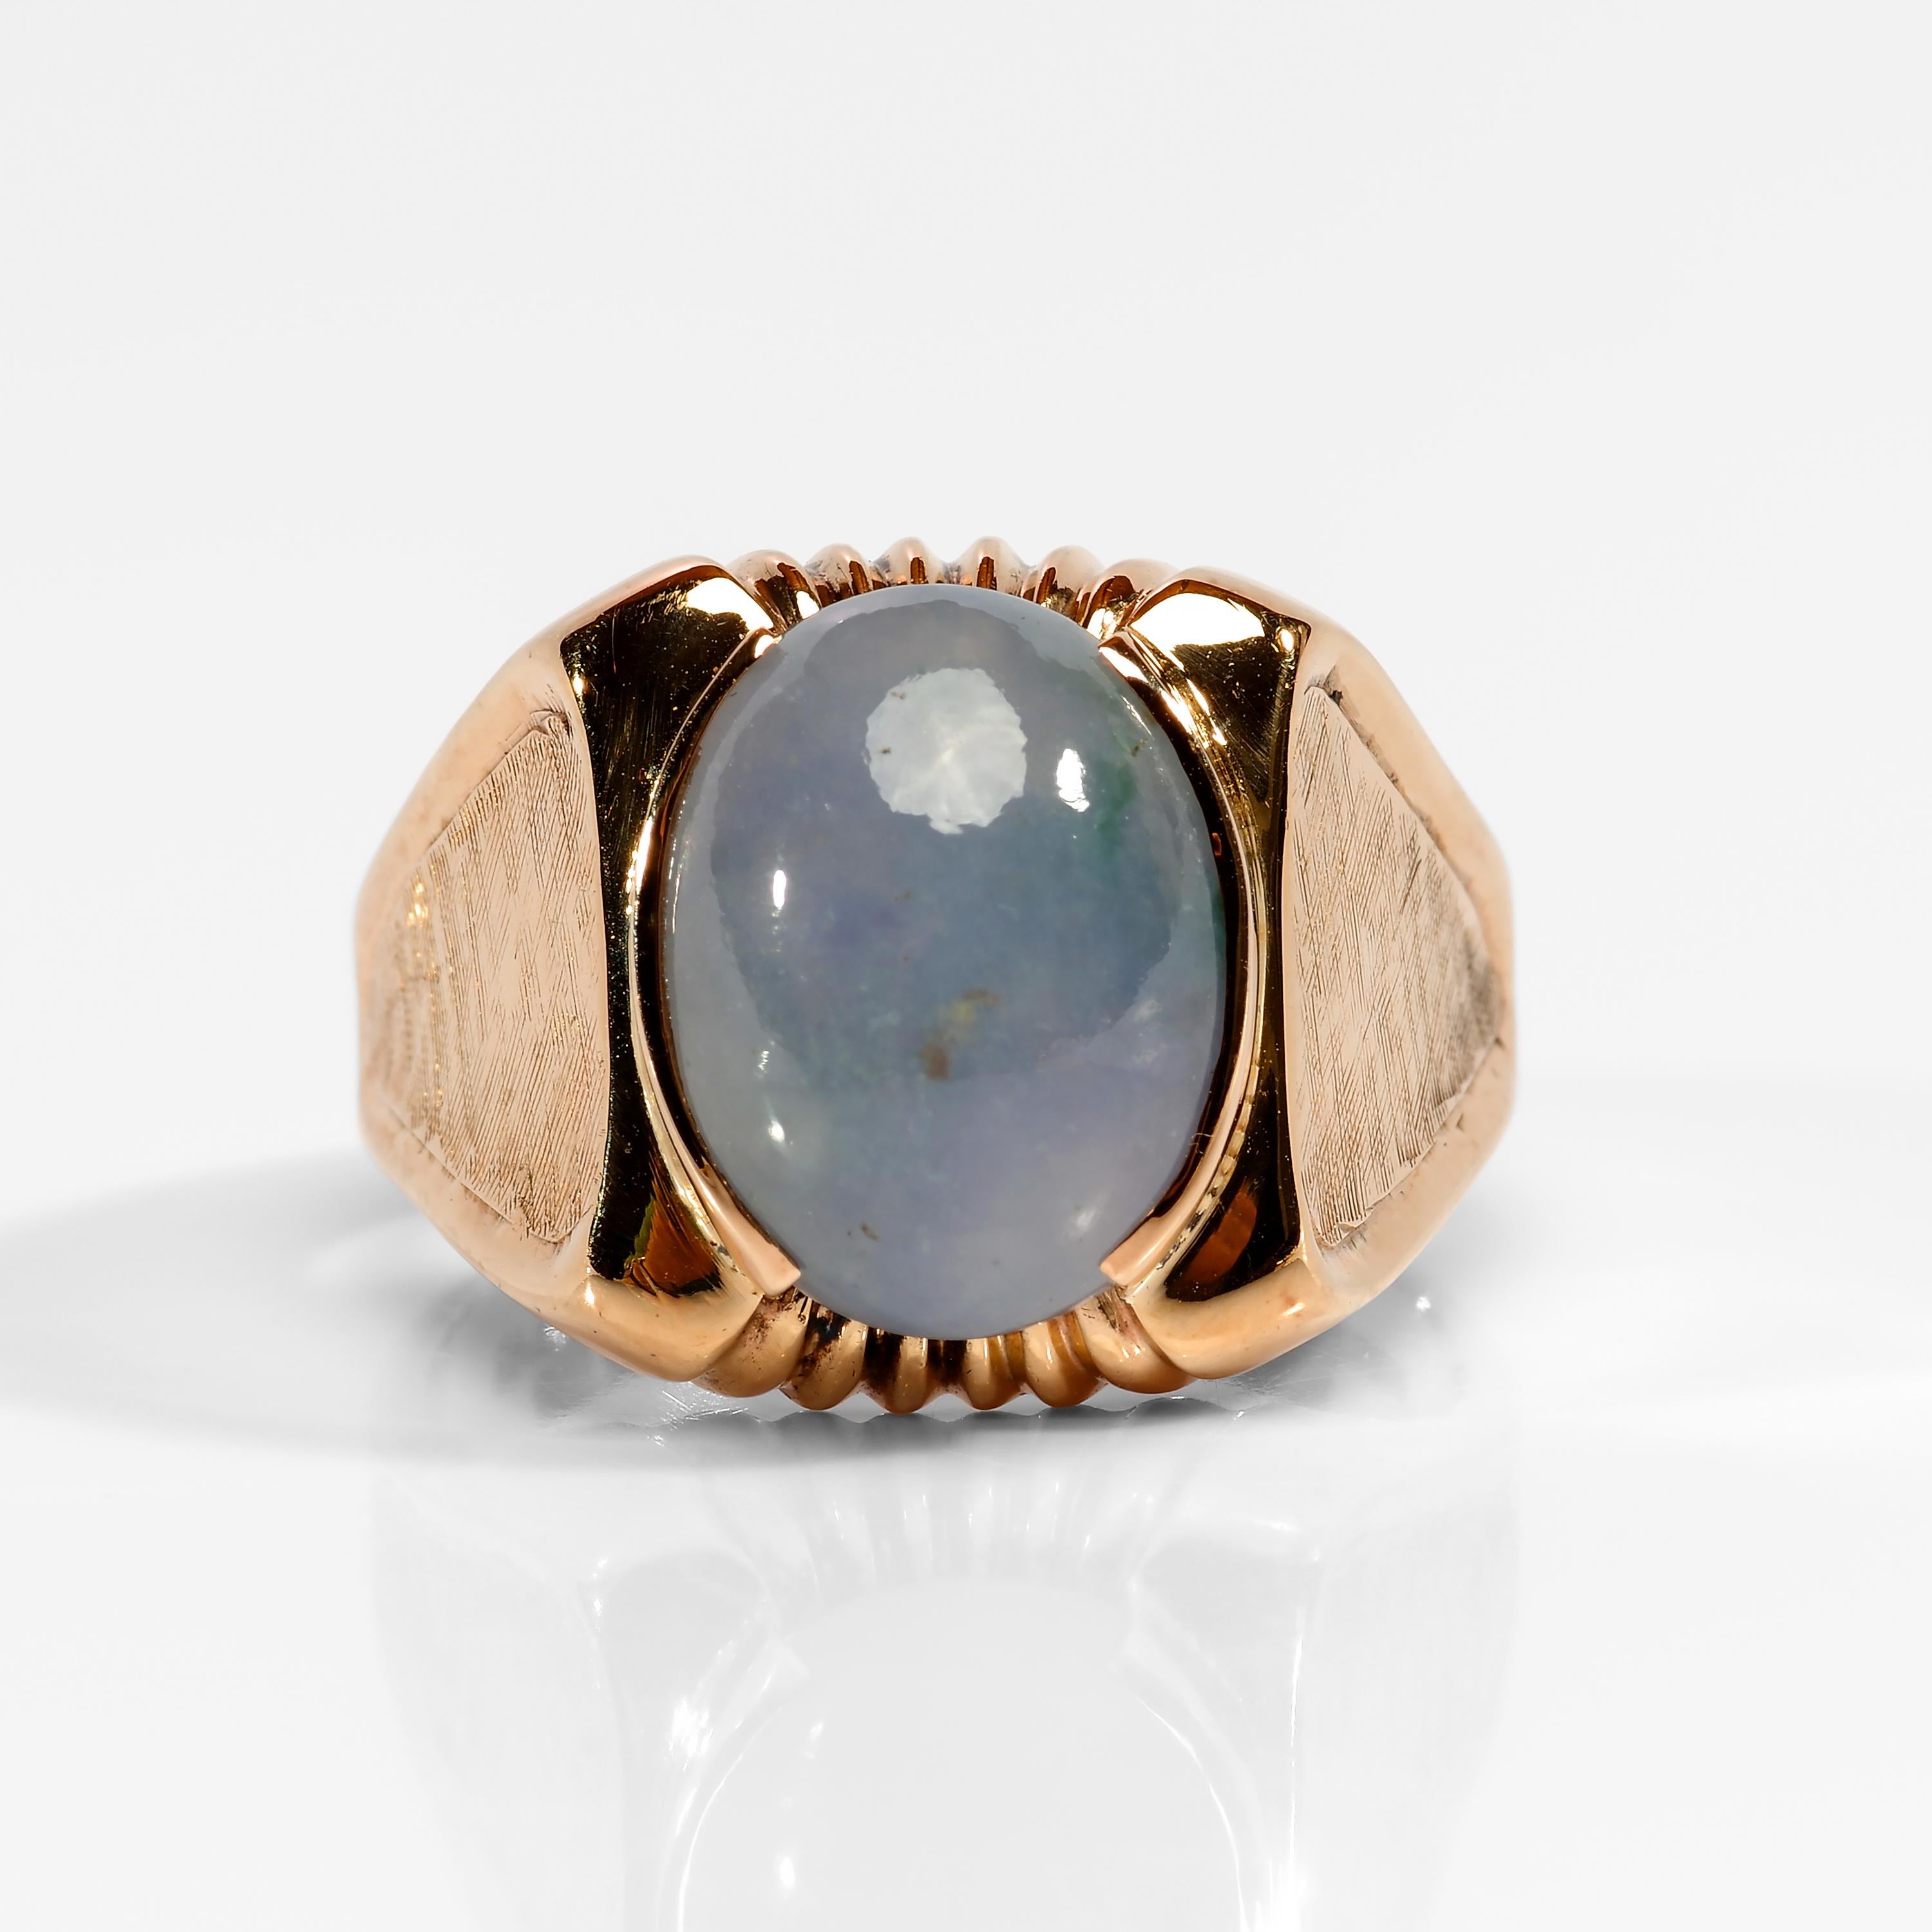 This Mid-Century men's ring was created in rosy red gold and showcases a beautiful lavender jadeite jade cabochon. The jade is a natural and untreated double cabochon with a beautiful translucency. There's a tiny sprig of green near one of the